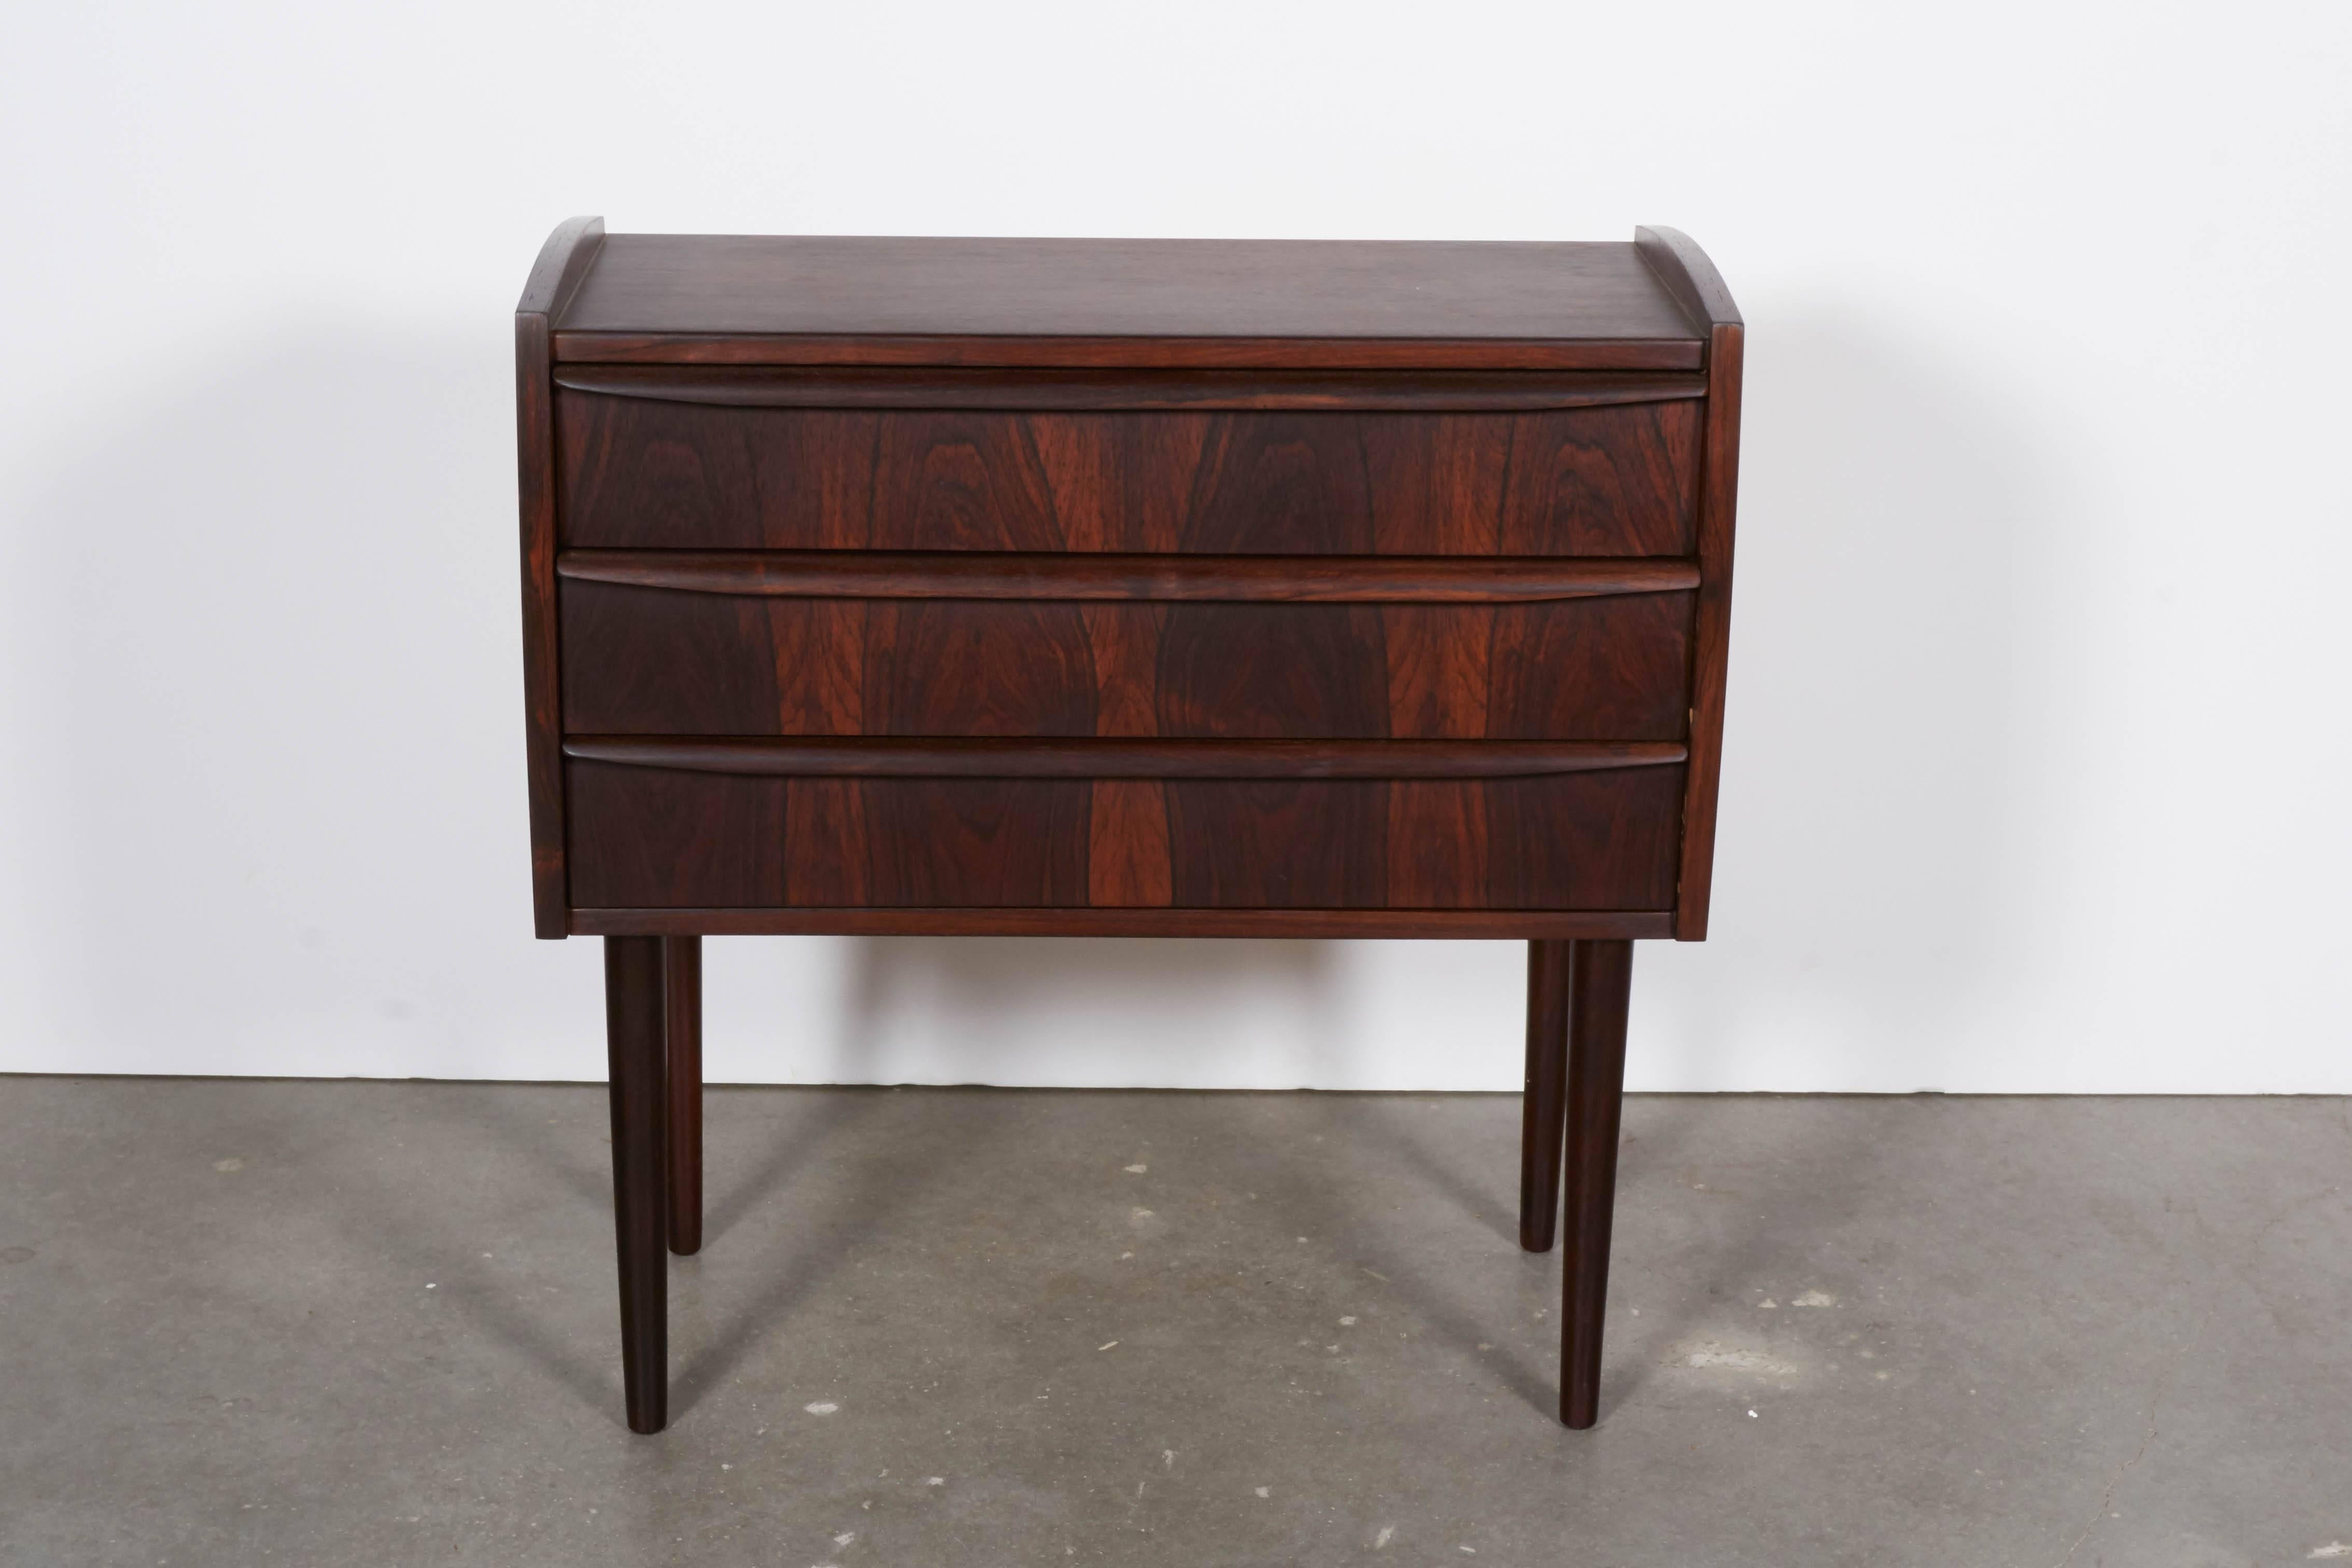 Vintage 1960s Rosewood Danish Bedside Tables, Pair

These mid century side tables are in excellent condition and can work as night stands or living room side tables. Ready for pick up, delivery, or shipping anywhere in the world. 